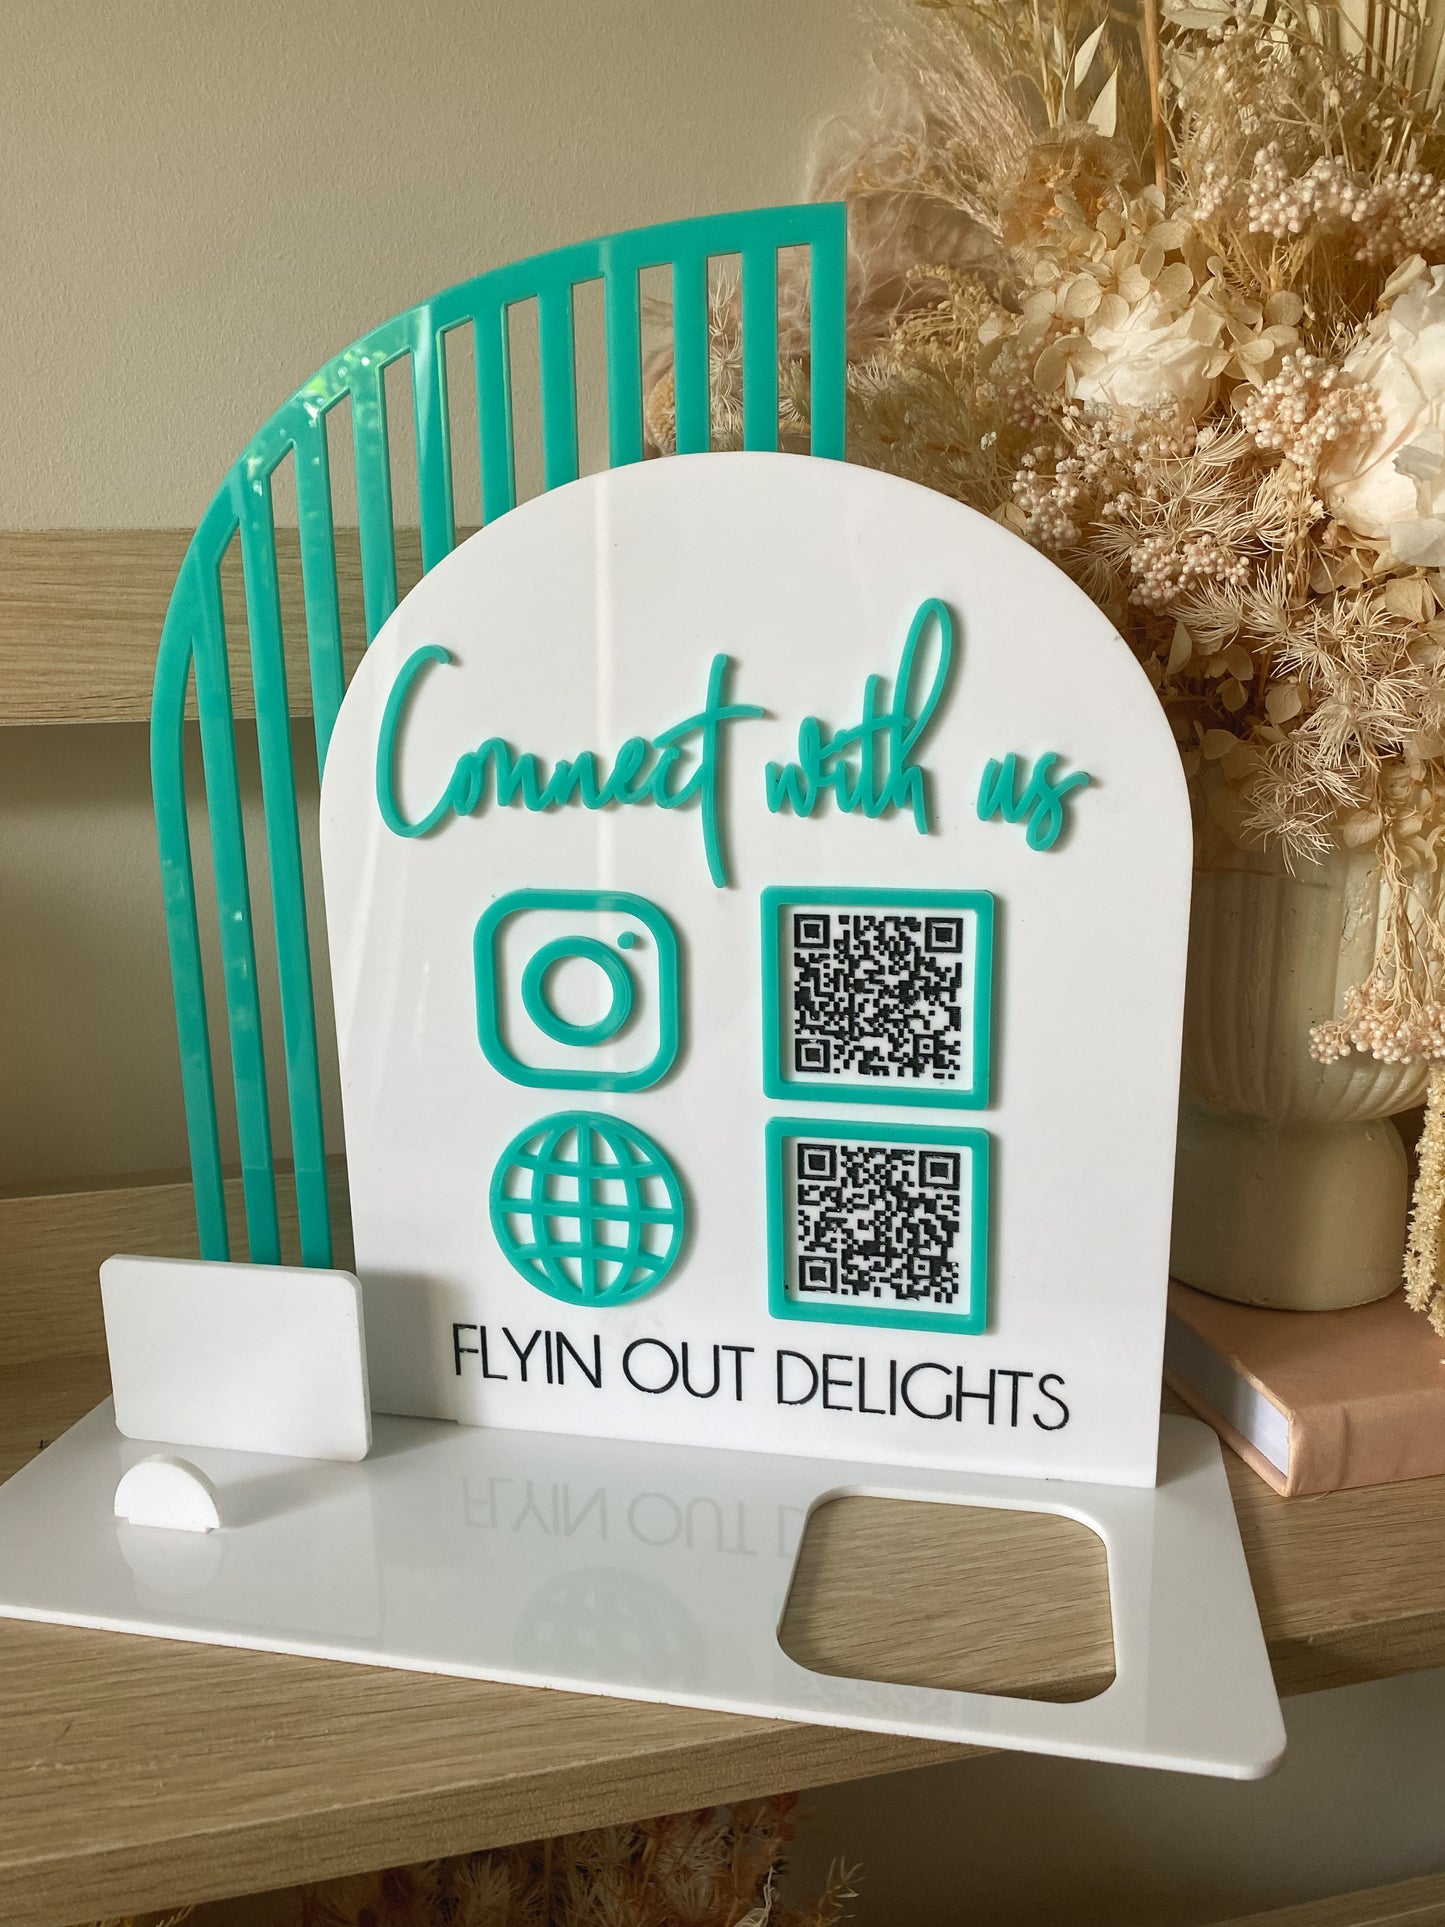 Acrylic Luxe Slotted Business 2x QR Code Social Media Signage